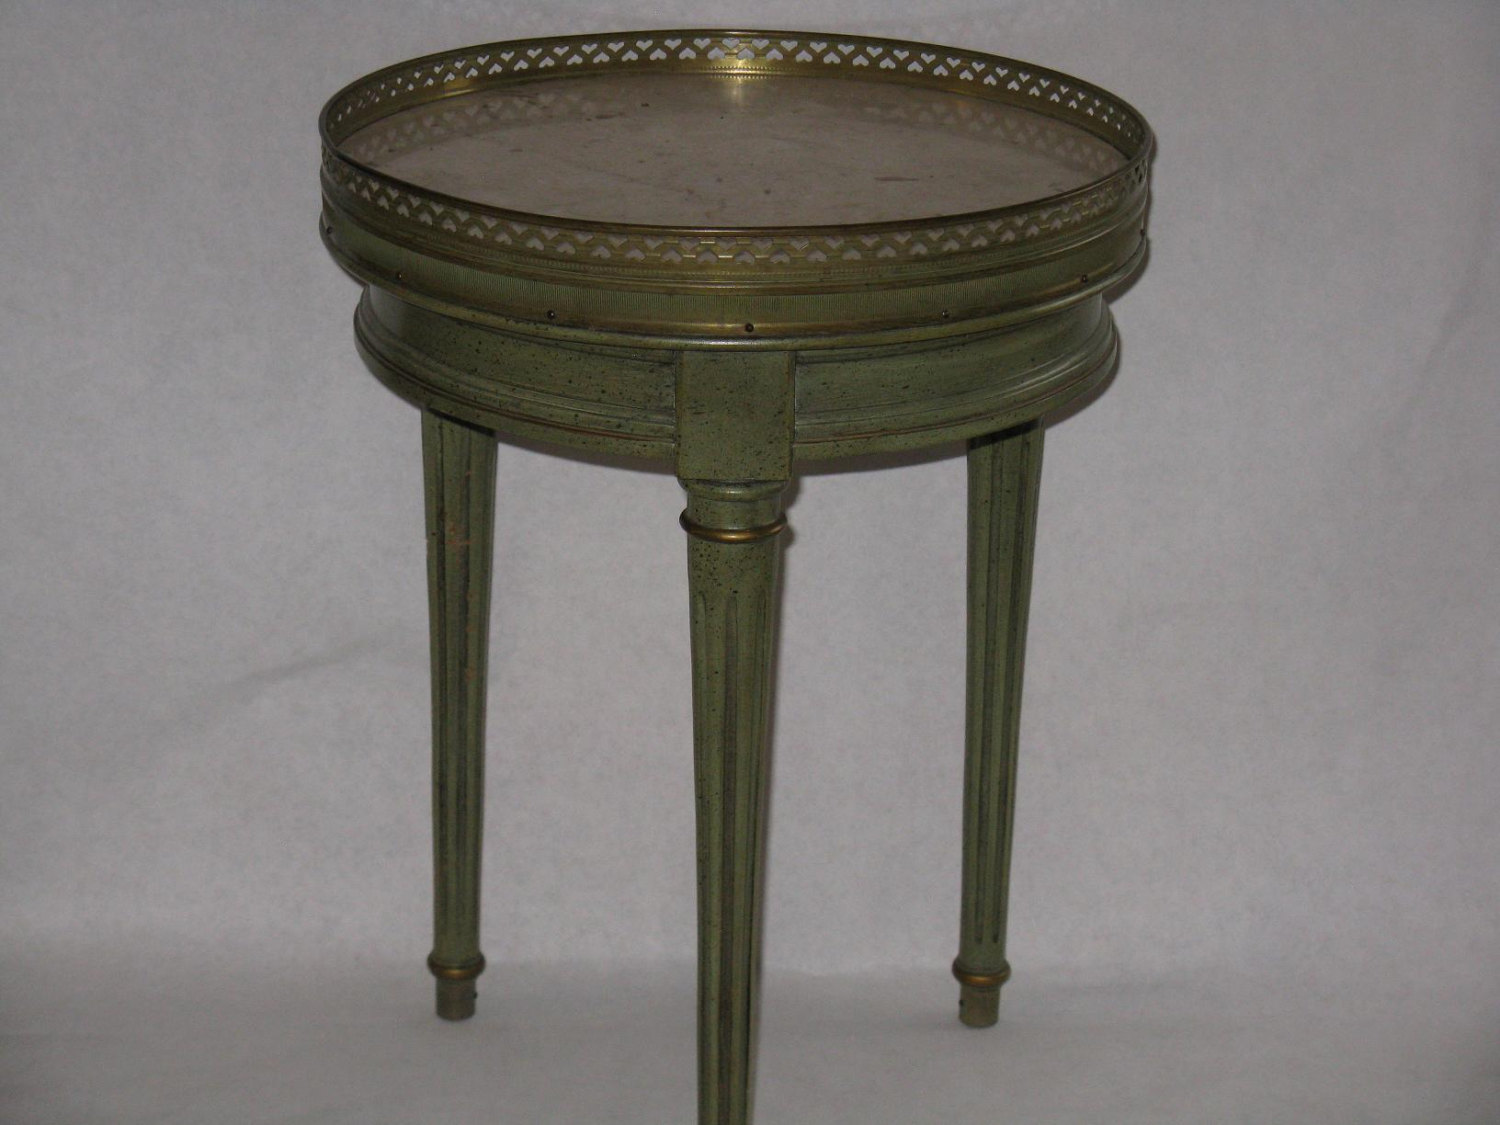 vintage brandt accent table green wood marble top brass fullxfull ihit small occasional end lamp legs round pottery barn floor lighting nic hammered copper tables inexpensive